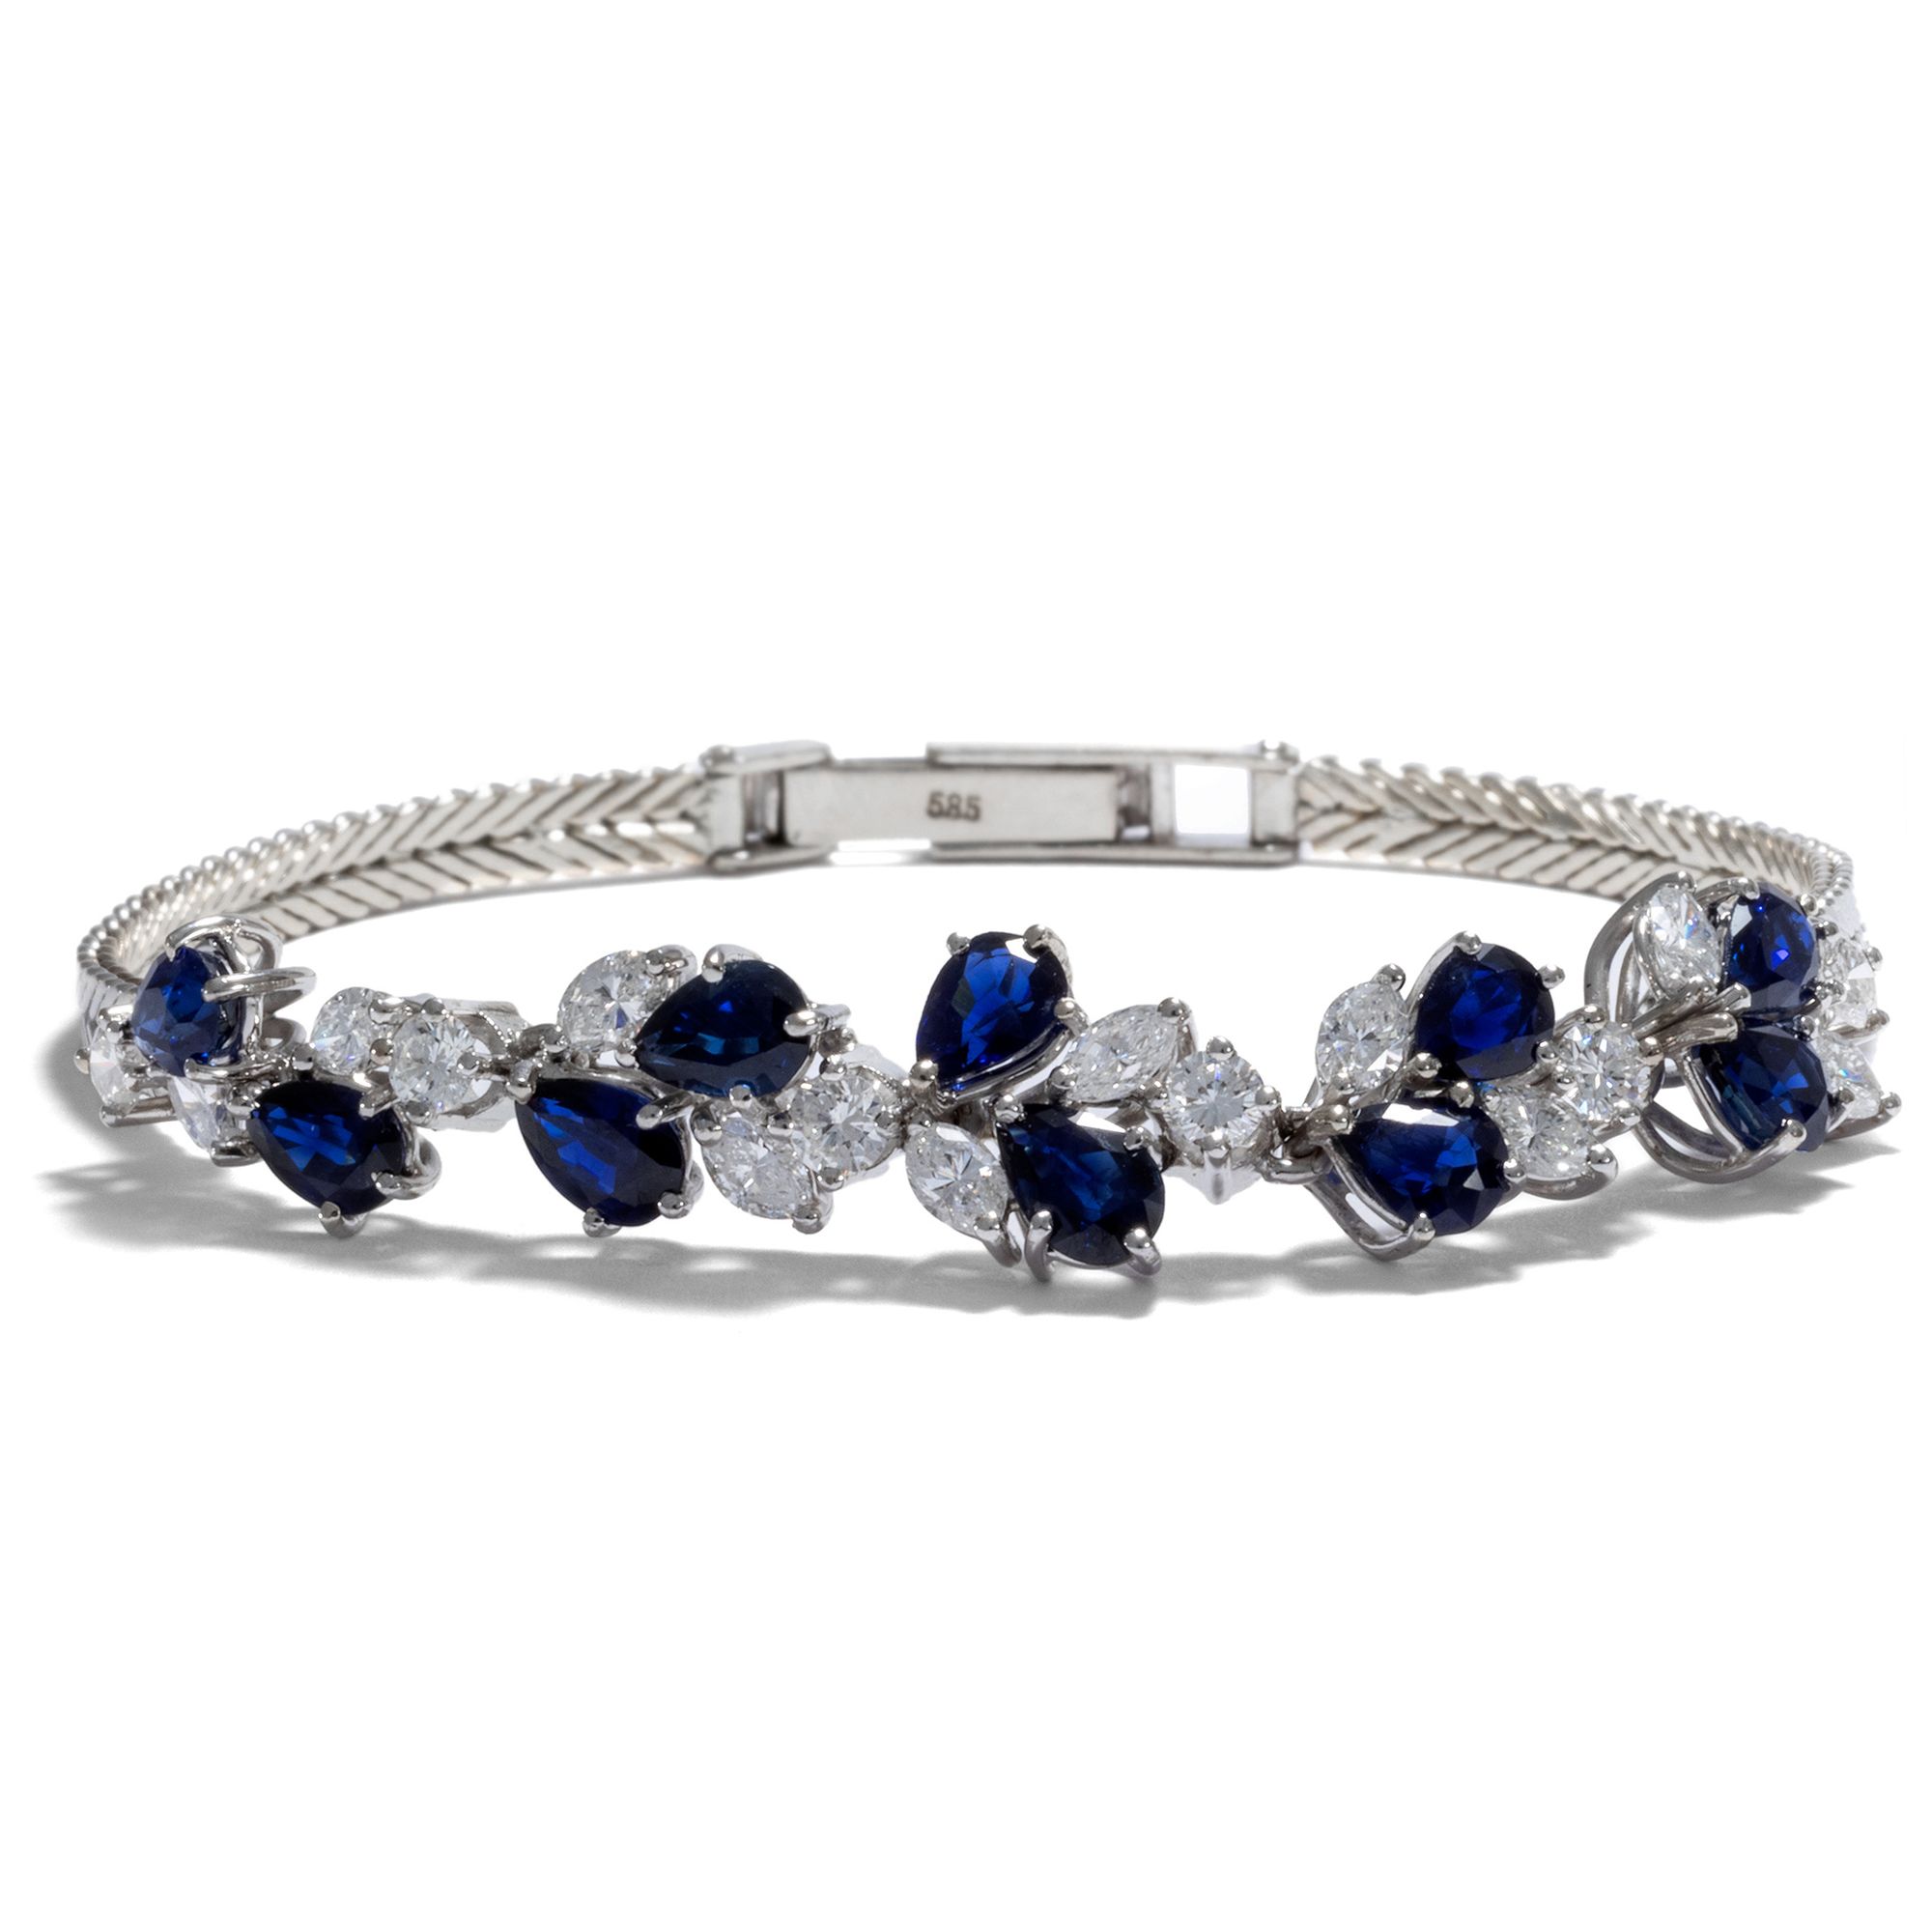 Fabulous Cluster Bracelet With Sapphires & Diamonds in White Gold, ca. 1965